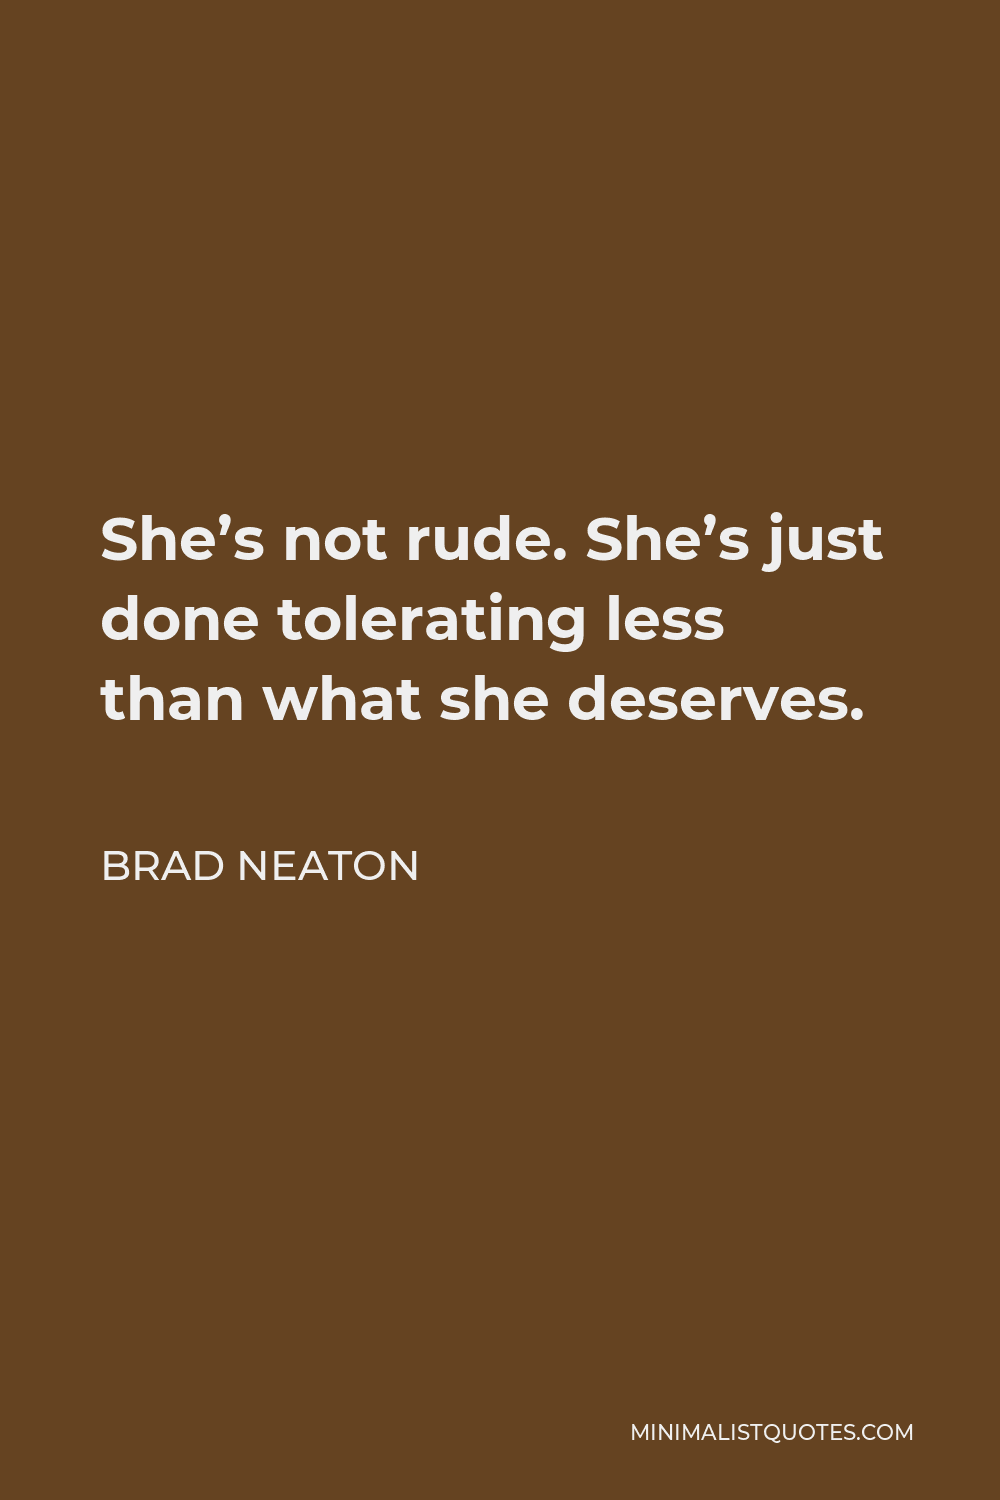 Brad Neaton Quote - She’s not rude. She’s just done tolerating less than what she deserves.